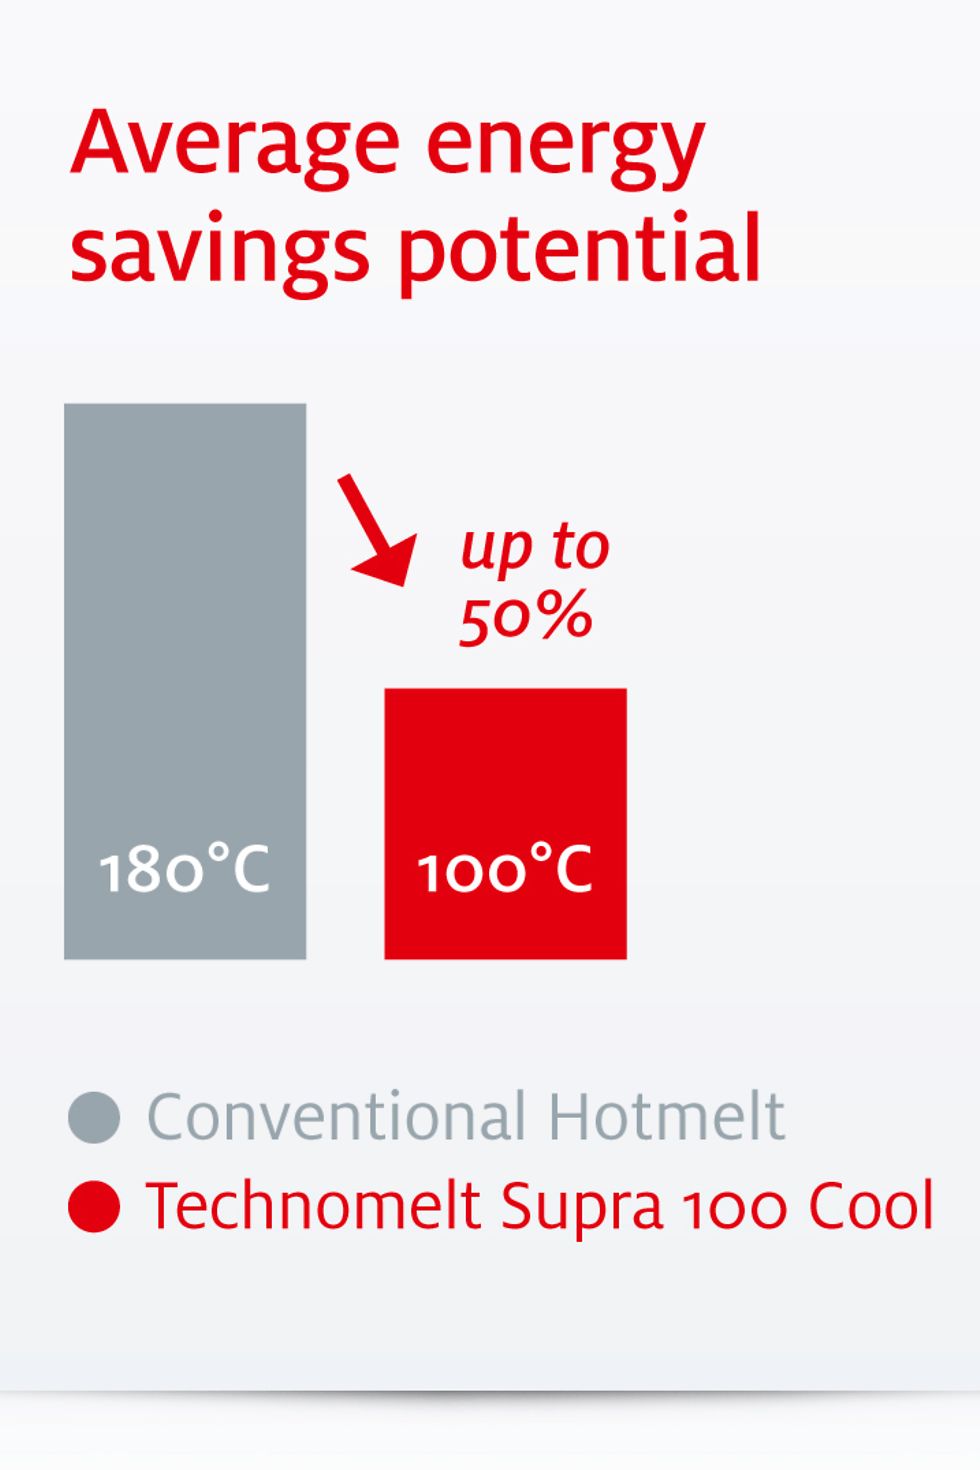 Low application temperature saves energy